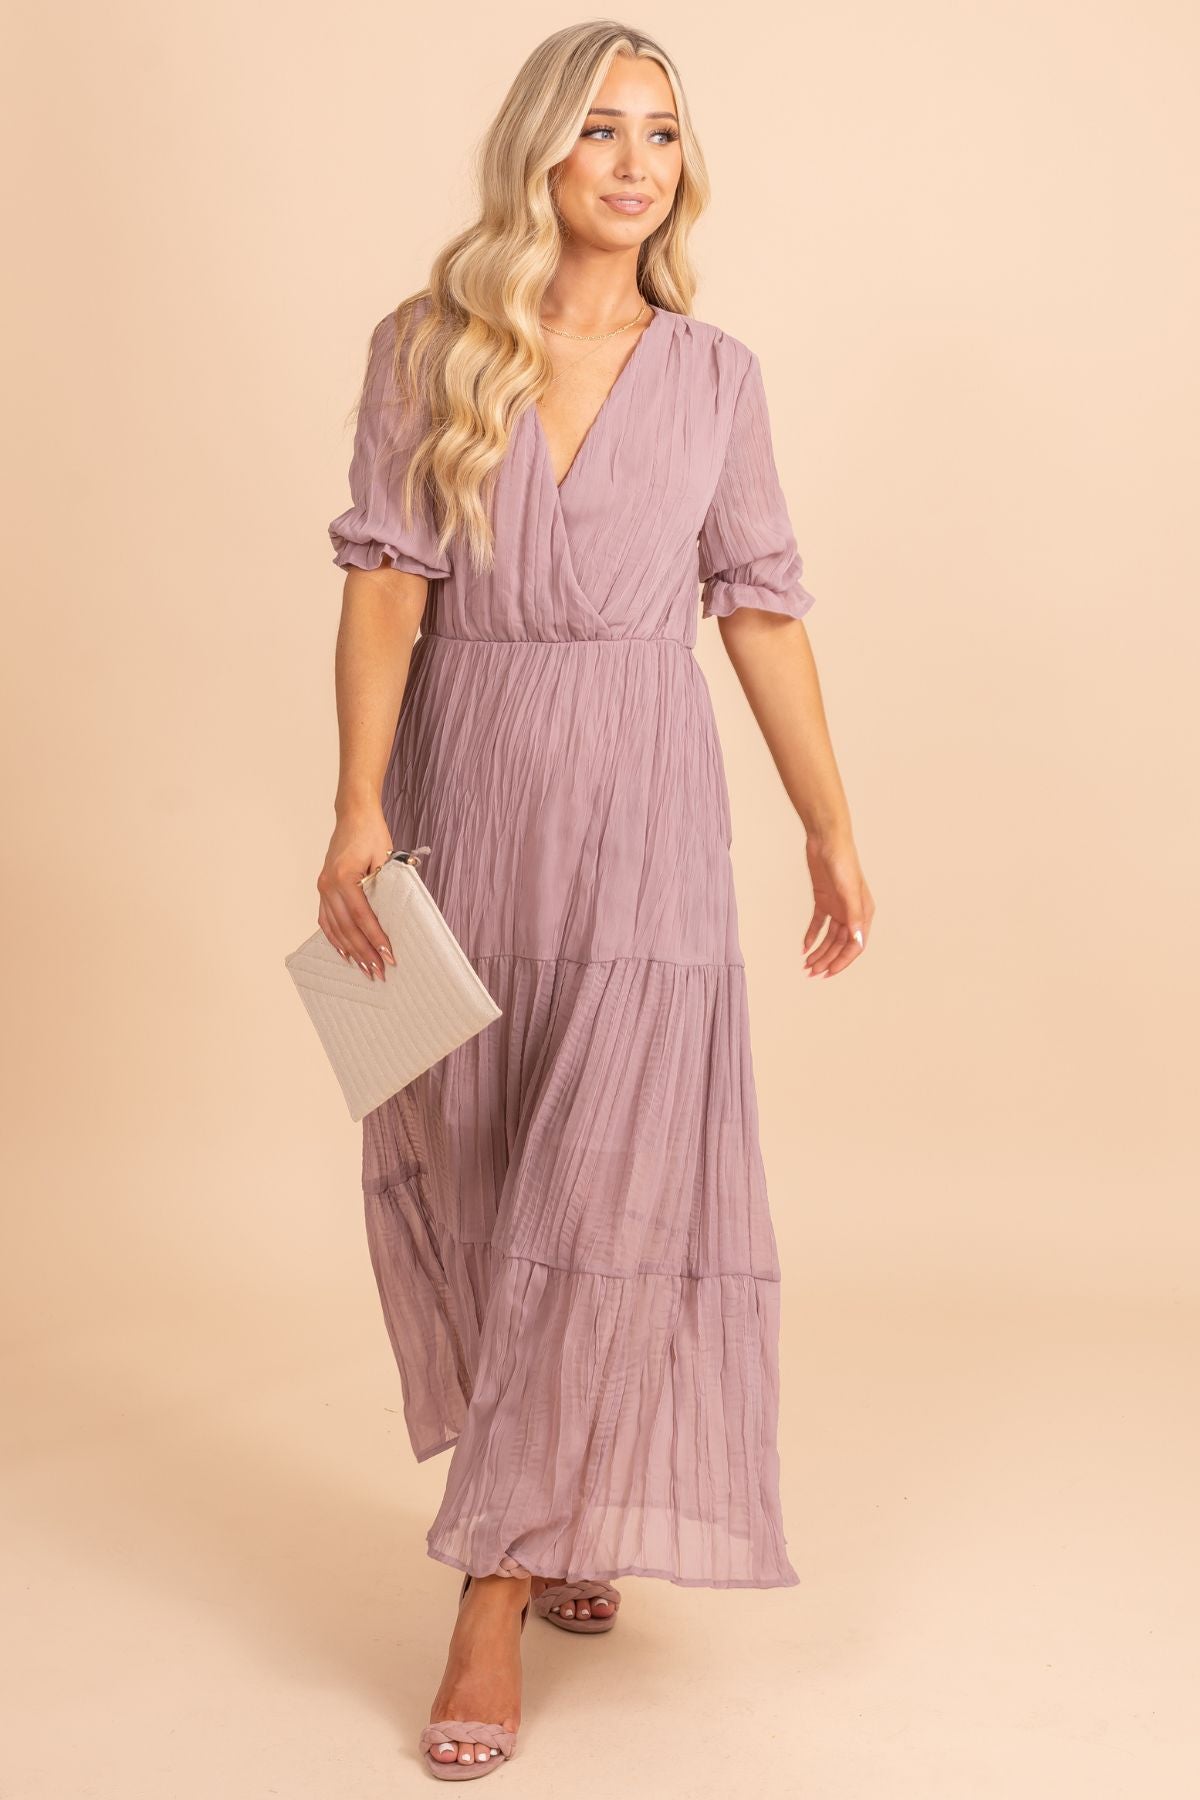 Chic Chiffon Light Purple Maxi Dress For Women Perfect For Spring Parties,  Beach Weddings, And Bridesmaids In Candy Colors Plus Size Available From  Kuanlu, $32.86 | DHgate.Com